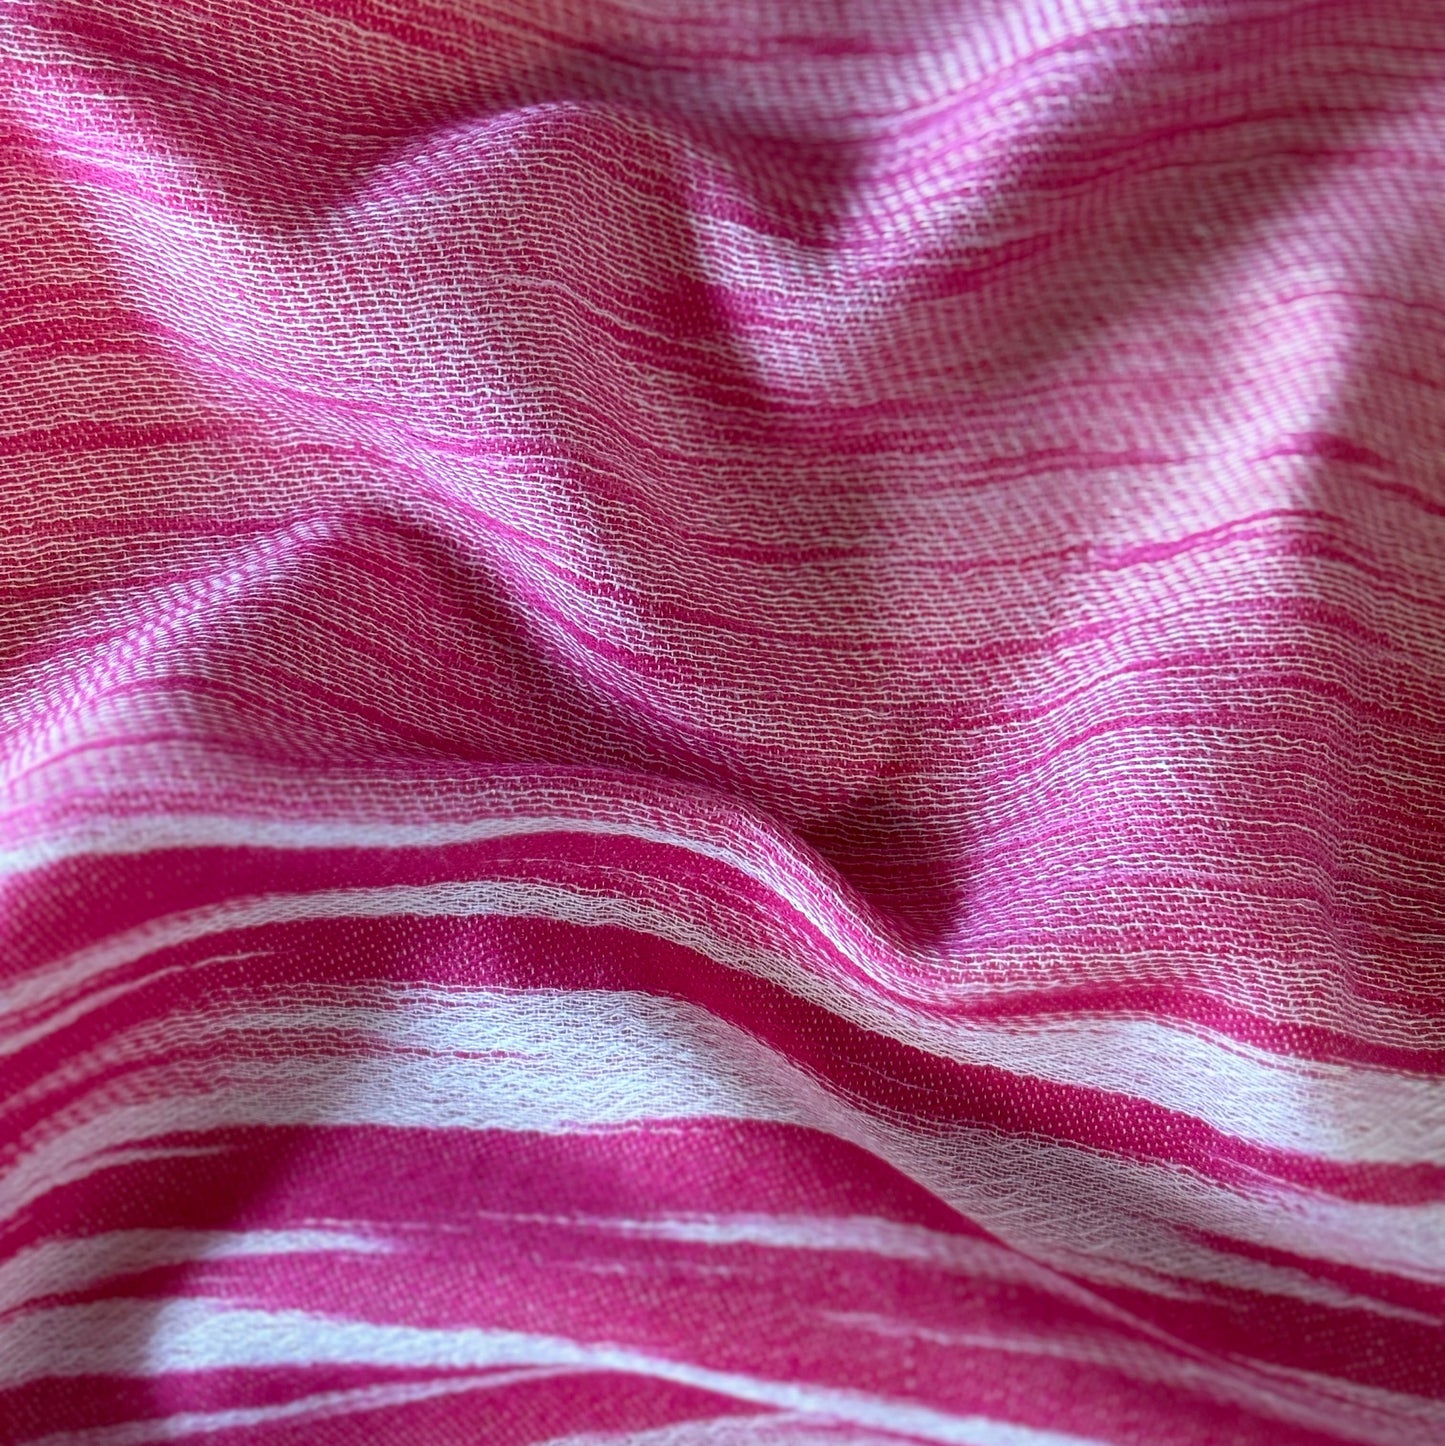 Soft Cashmere Scarf in Hot Pink color